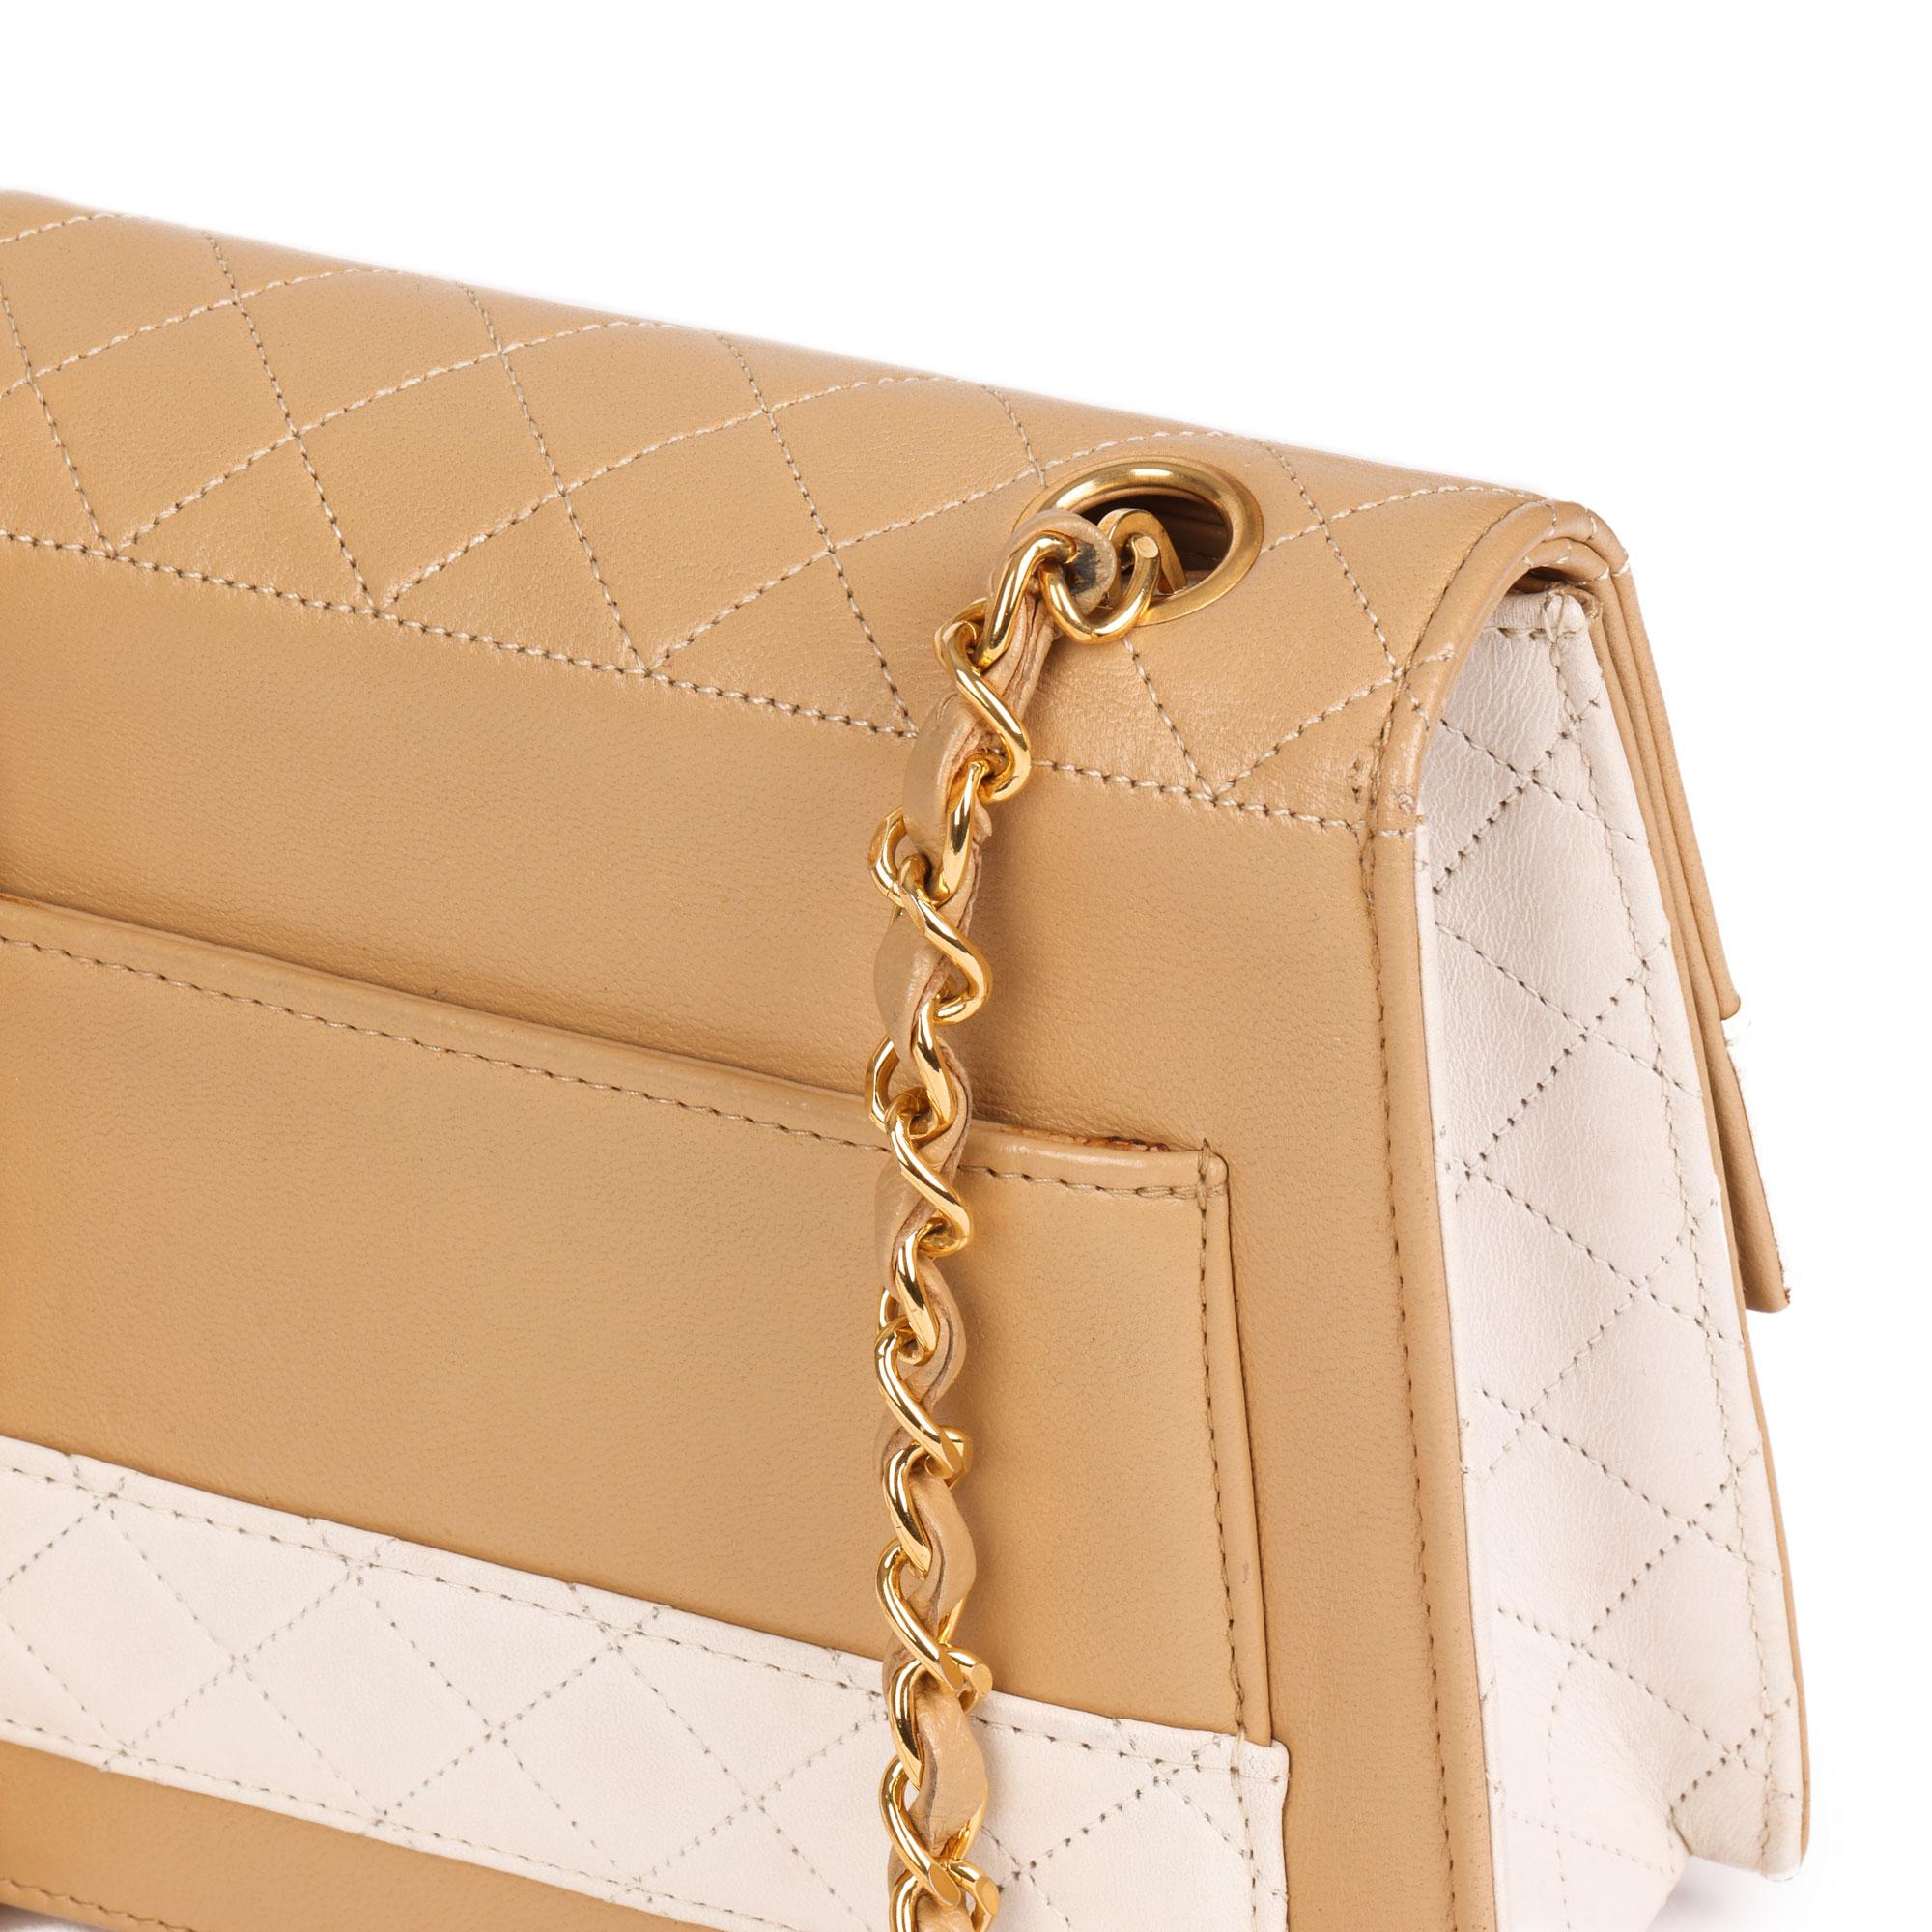 Chanel Beige & White Quilted Lambskin Vintage Mini Trapeze Classic Flap Bag 6